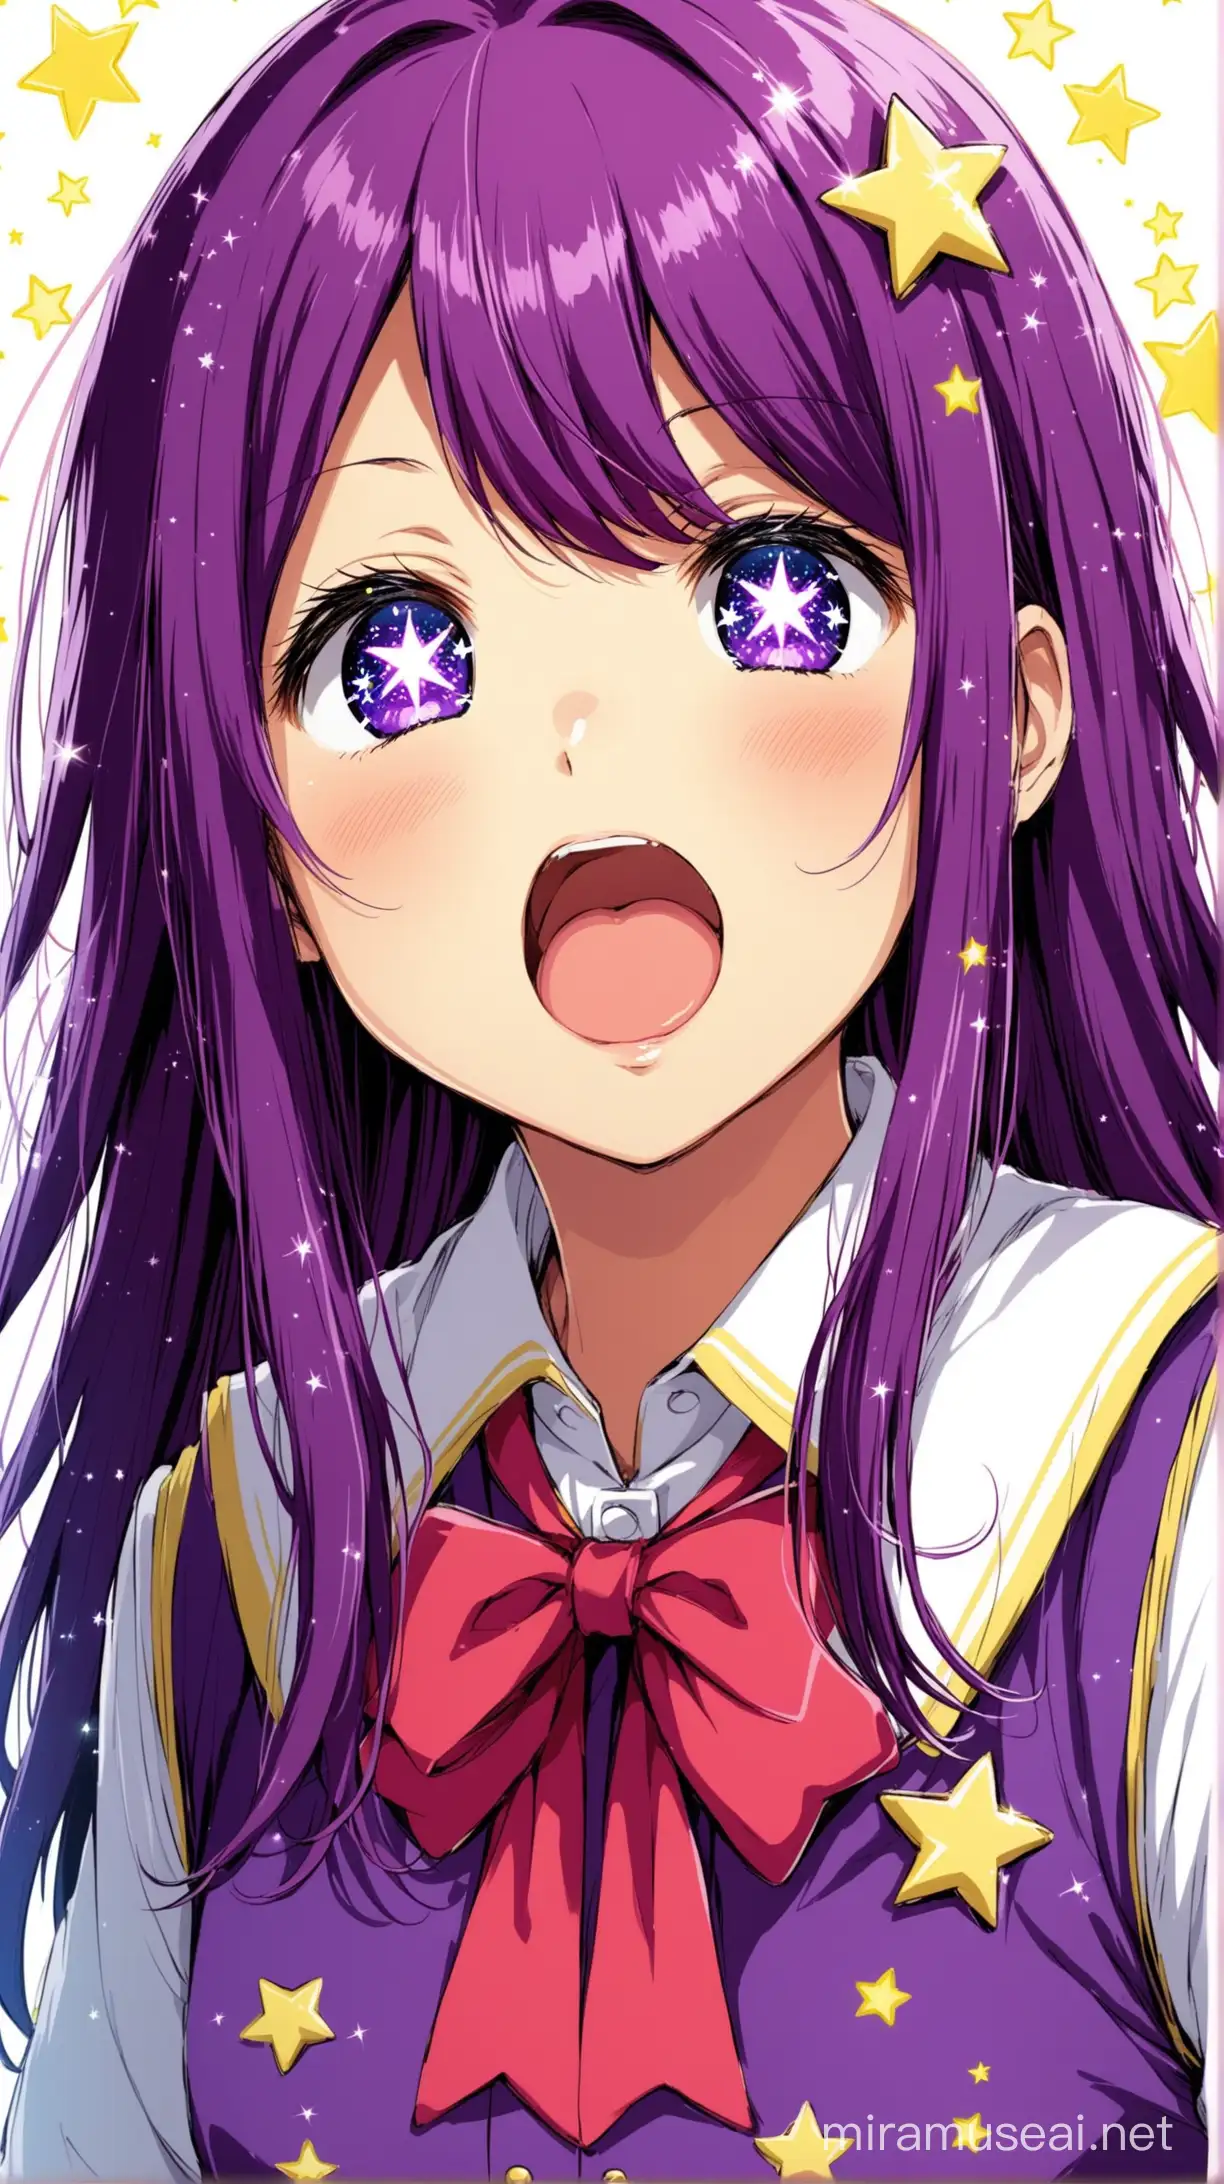 Idol Ai Hoshino with Long Purple Hair and Starry Eyes in OpenMouthed Pose